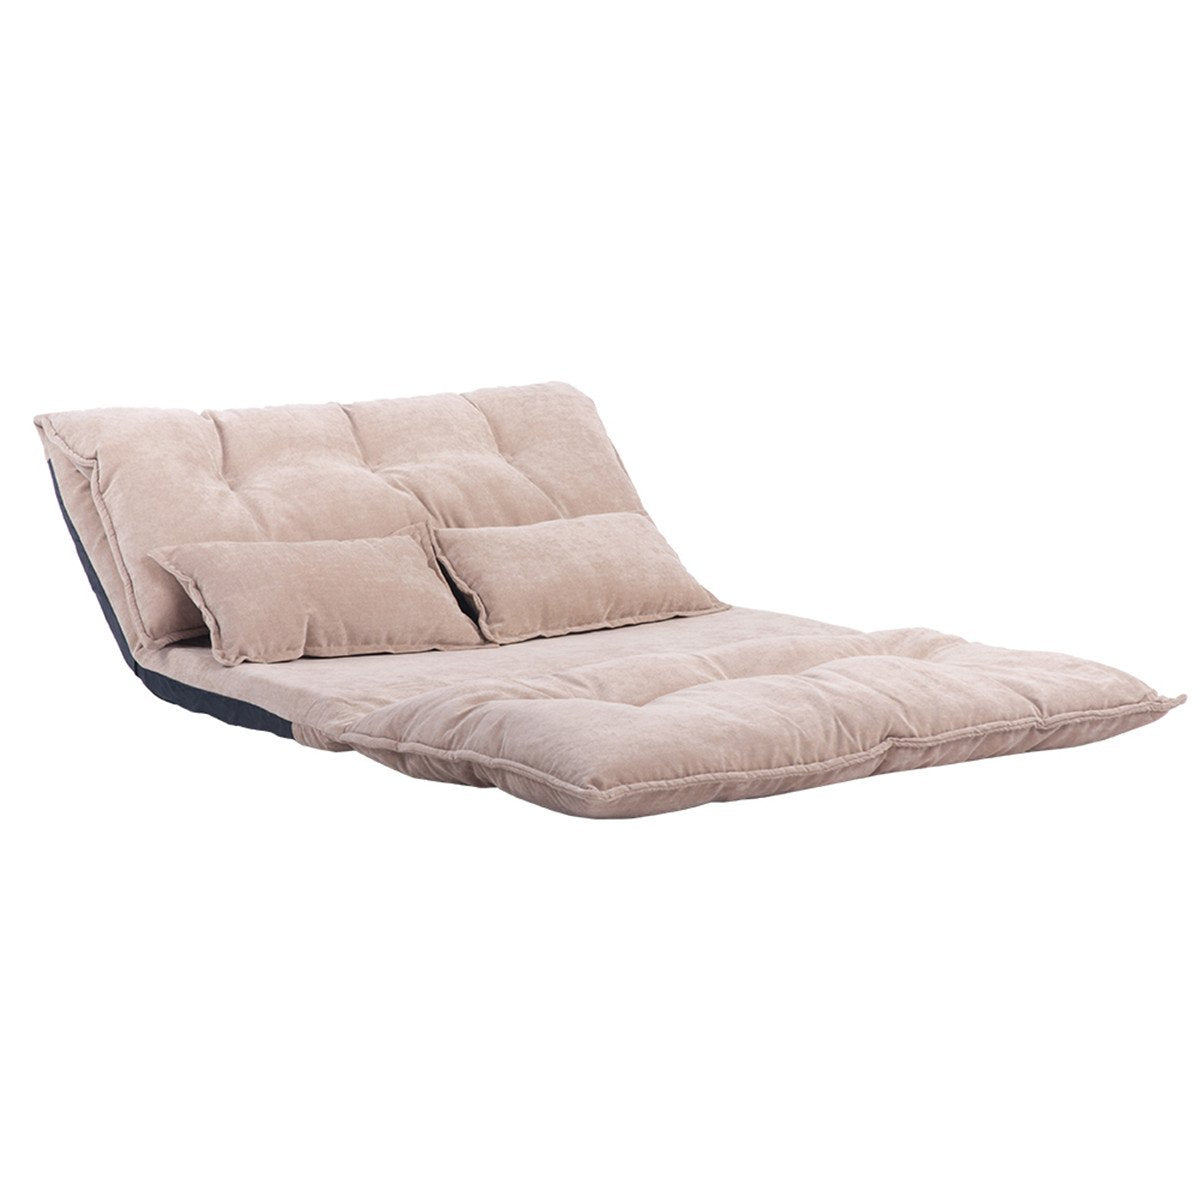 Adjustable Folding Lazy Sofa Floor Chaise Lounge Chair Futon with